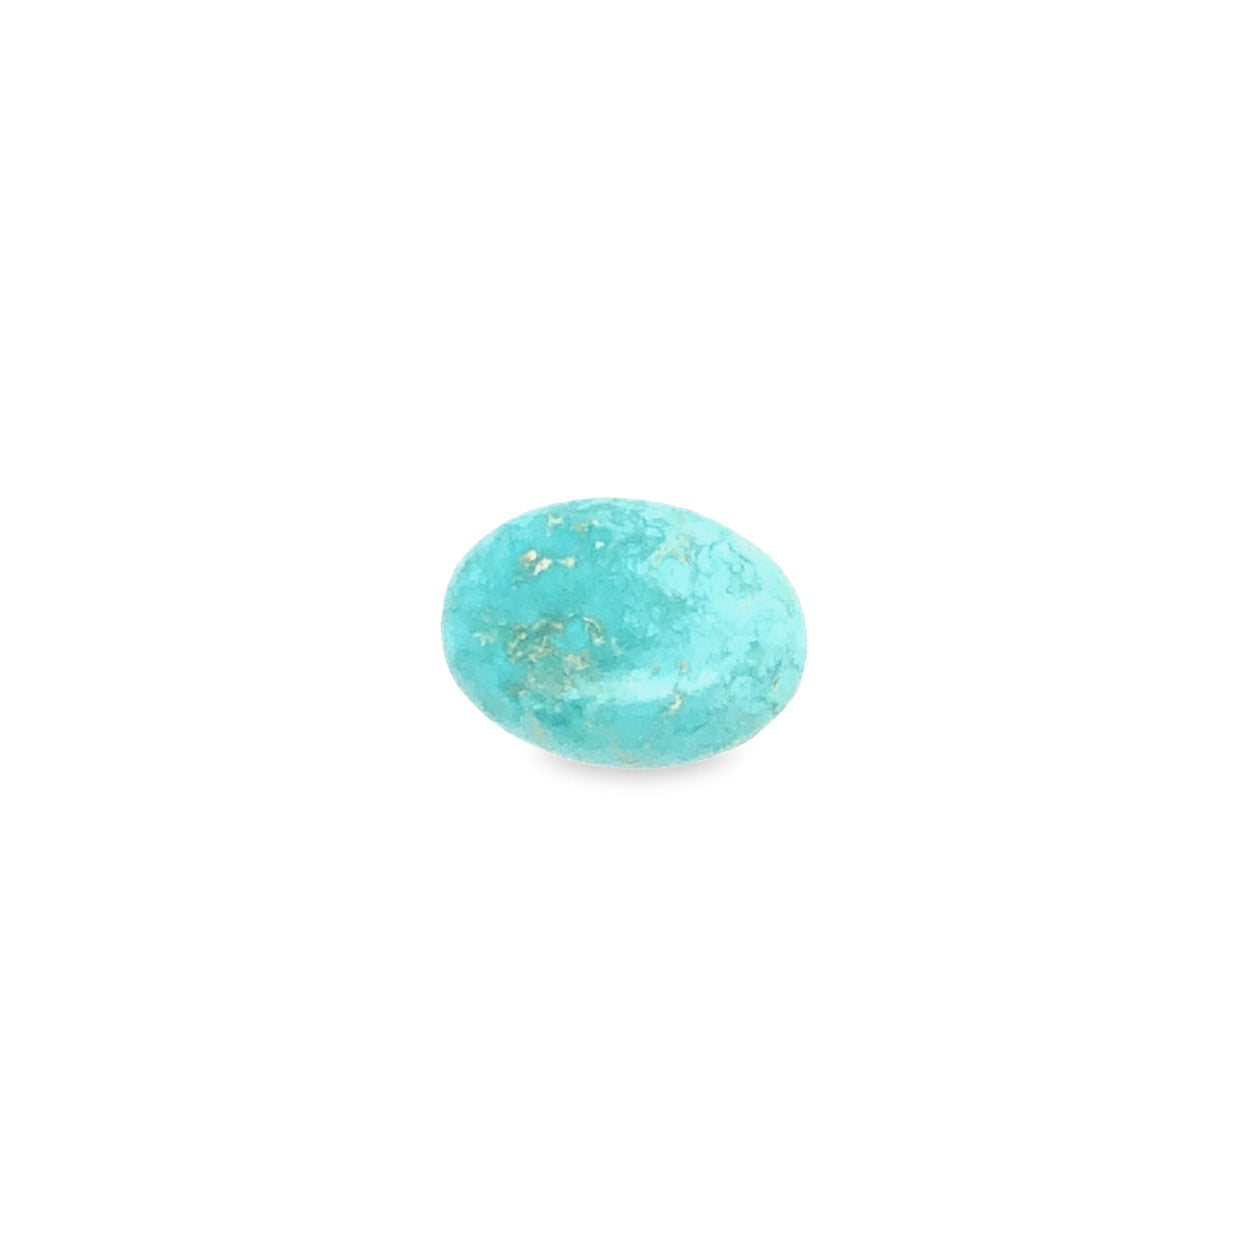 Loose Narooma Turquoise Oval Shaped 10.44Ct Blue